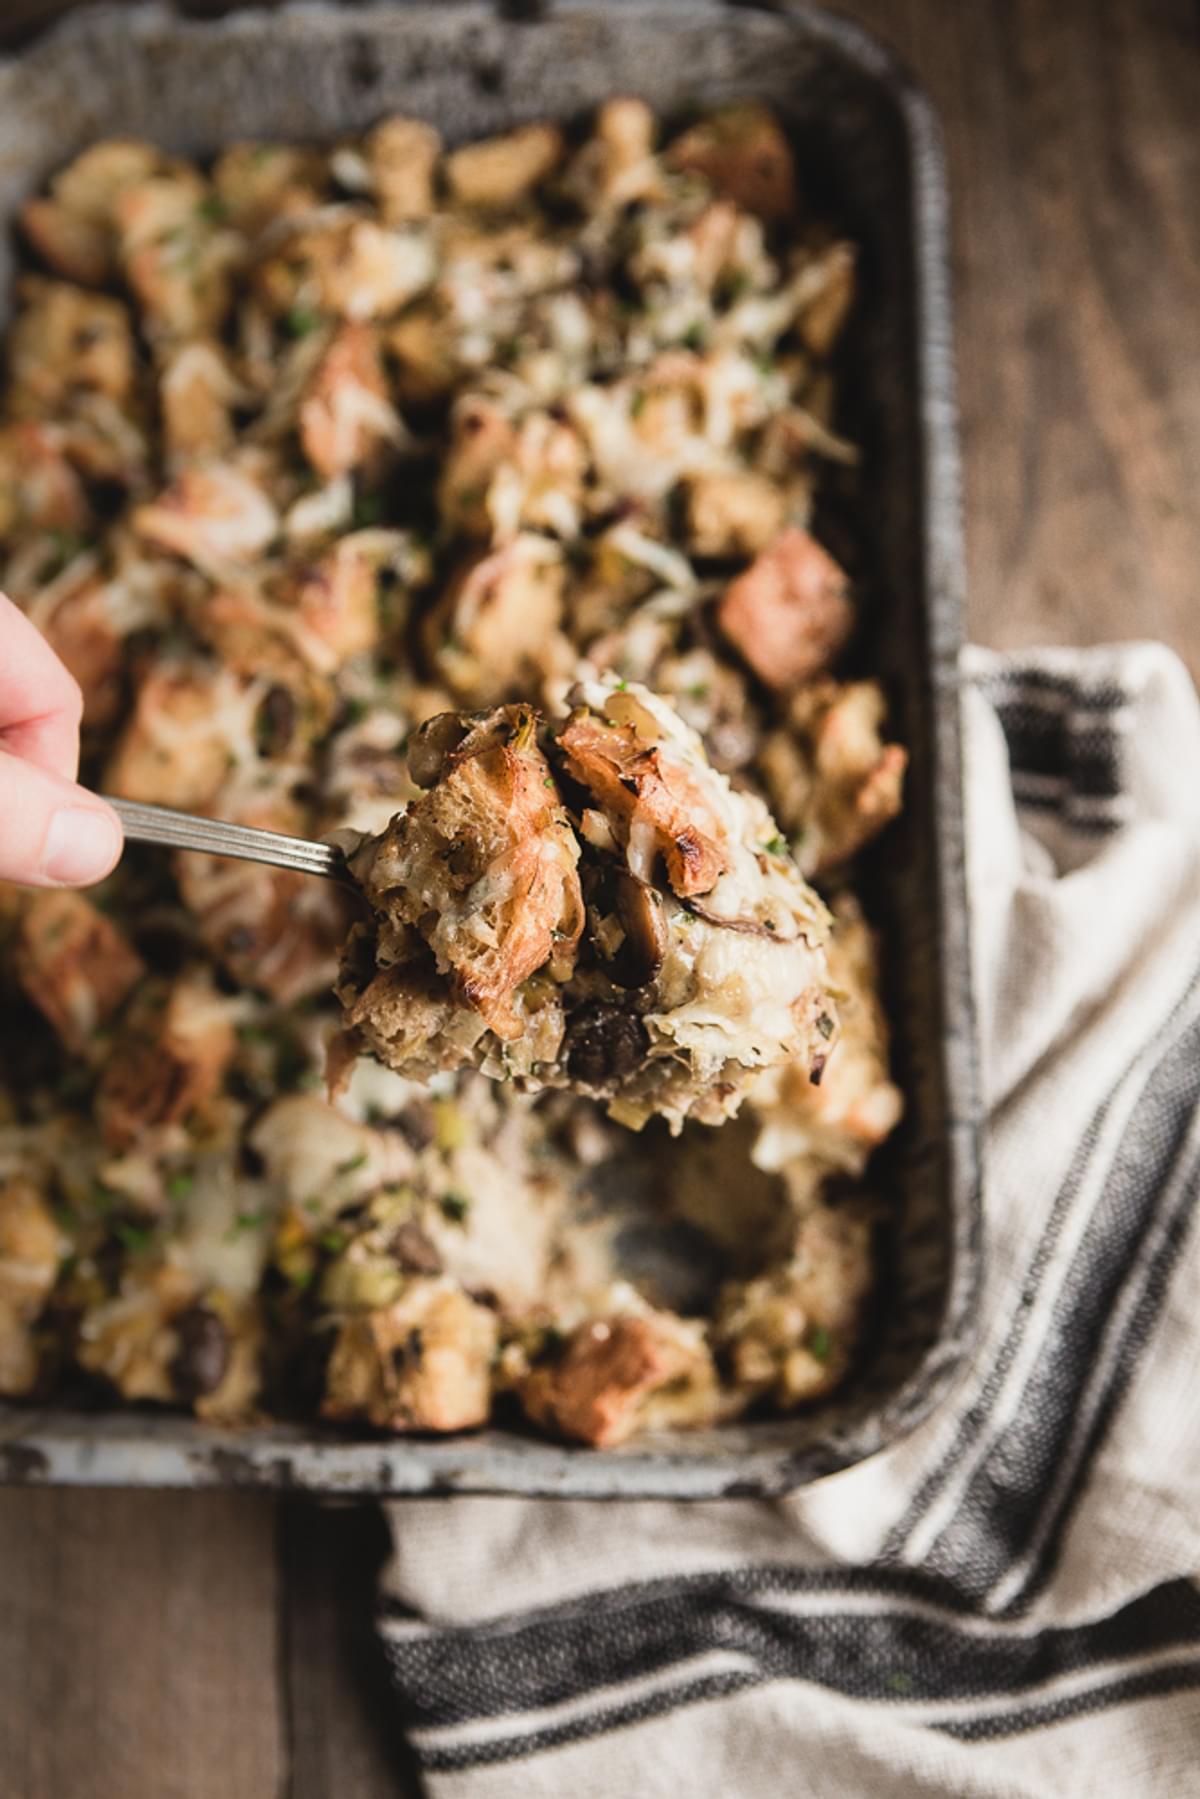 large spoon scooping mushroom and leek bread pudding out of a baking dish